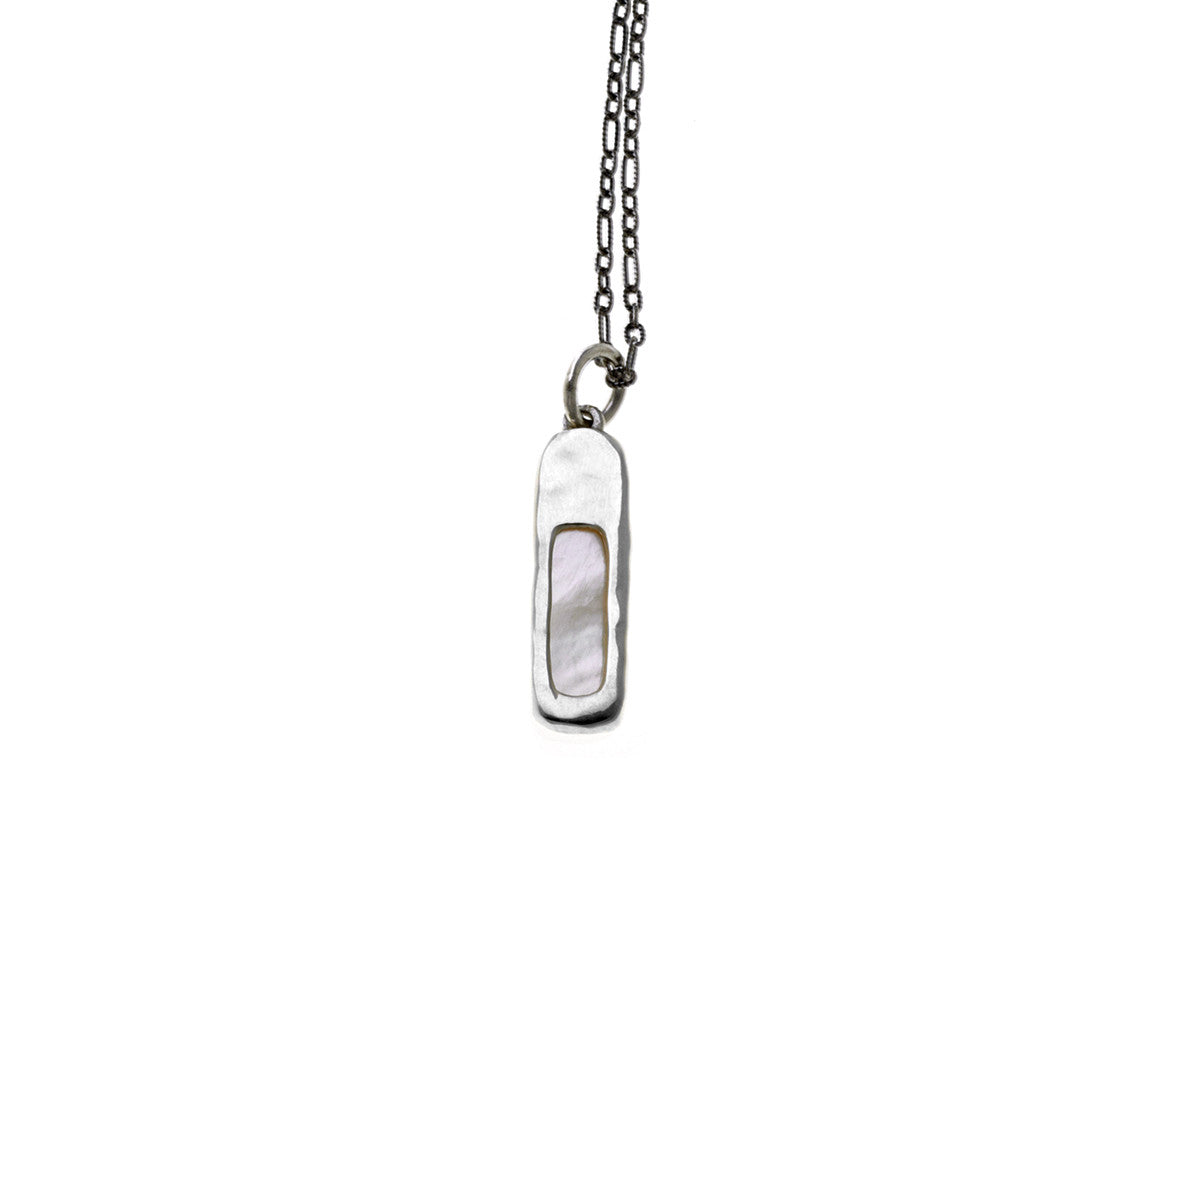 Mystical Pagoda Organic Sterling Silver Necklace - Cynthia Gale New York Jewelry